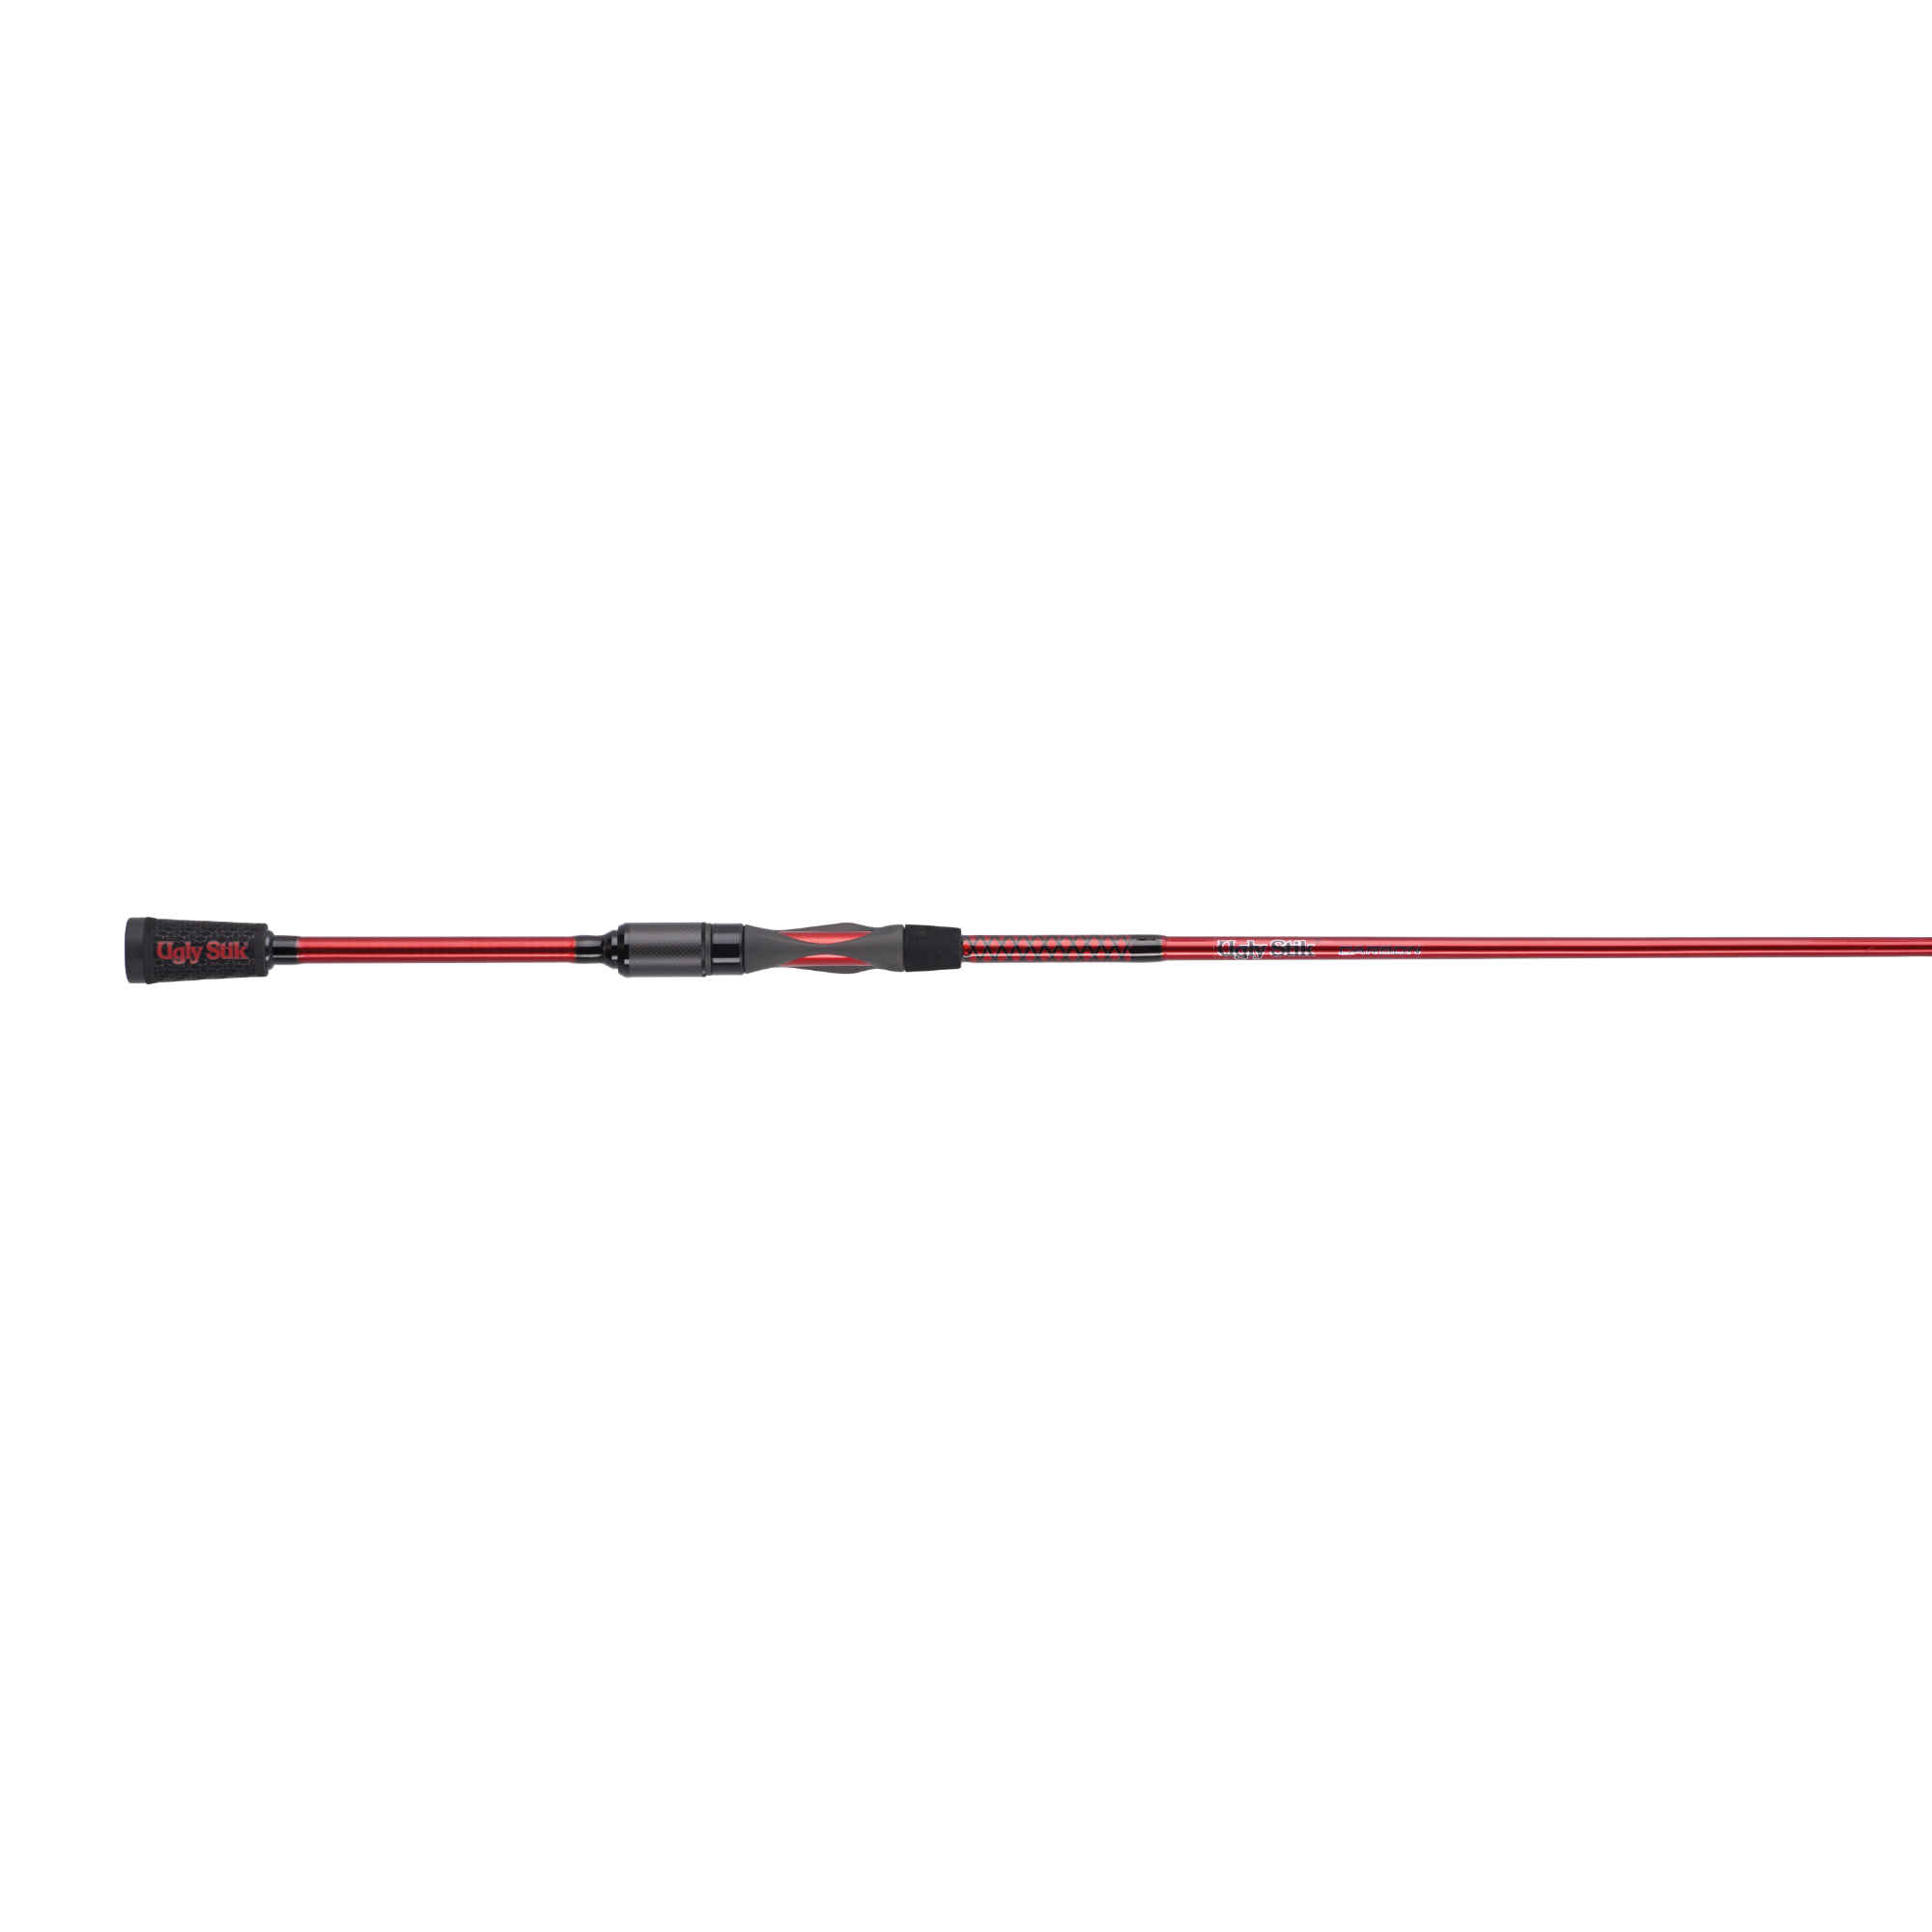 Ugly Stik Carbon Spinning Rod, 2 Piece, Medium, Fast, 8 Guides, 1/8-1/2oz  Lures USCBSP662M with Free S&H — CampSaver